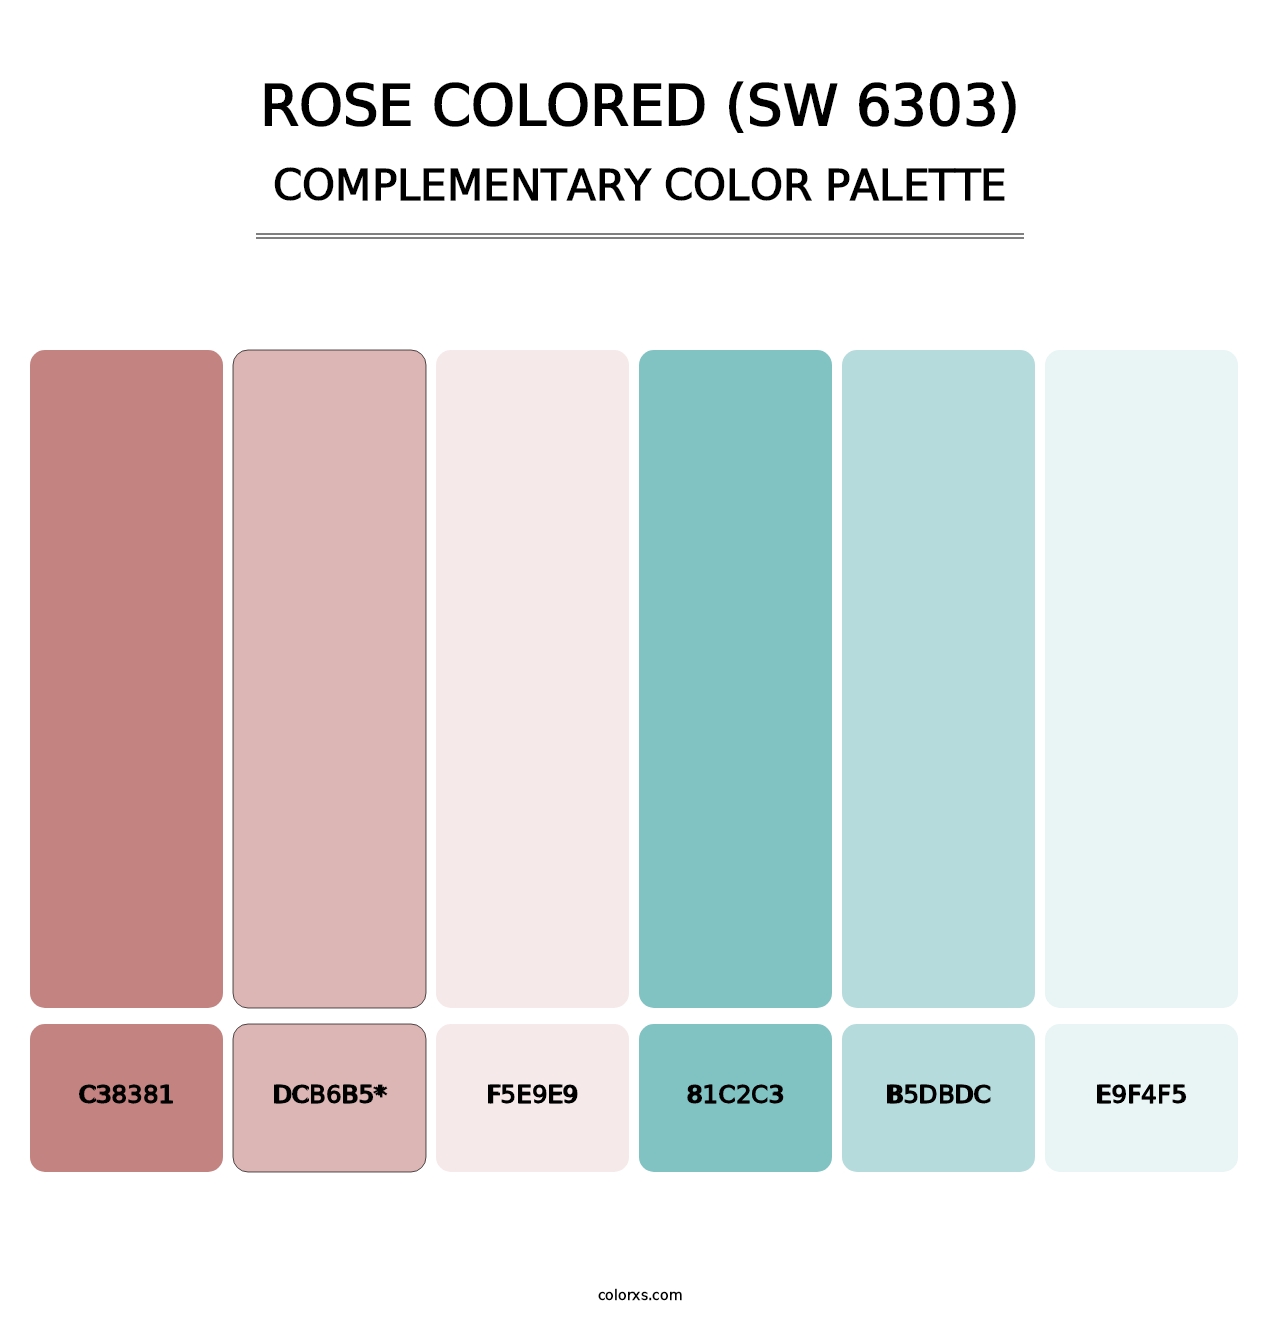 Rose Colored (SW 6303) - Complementary Color Palette